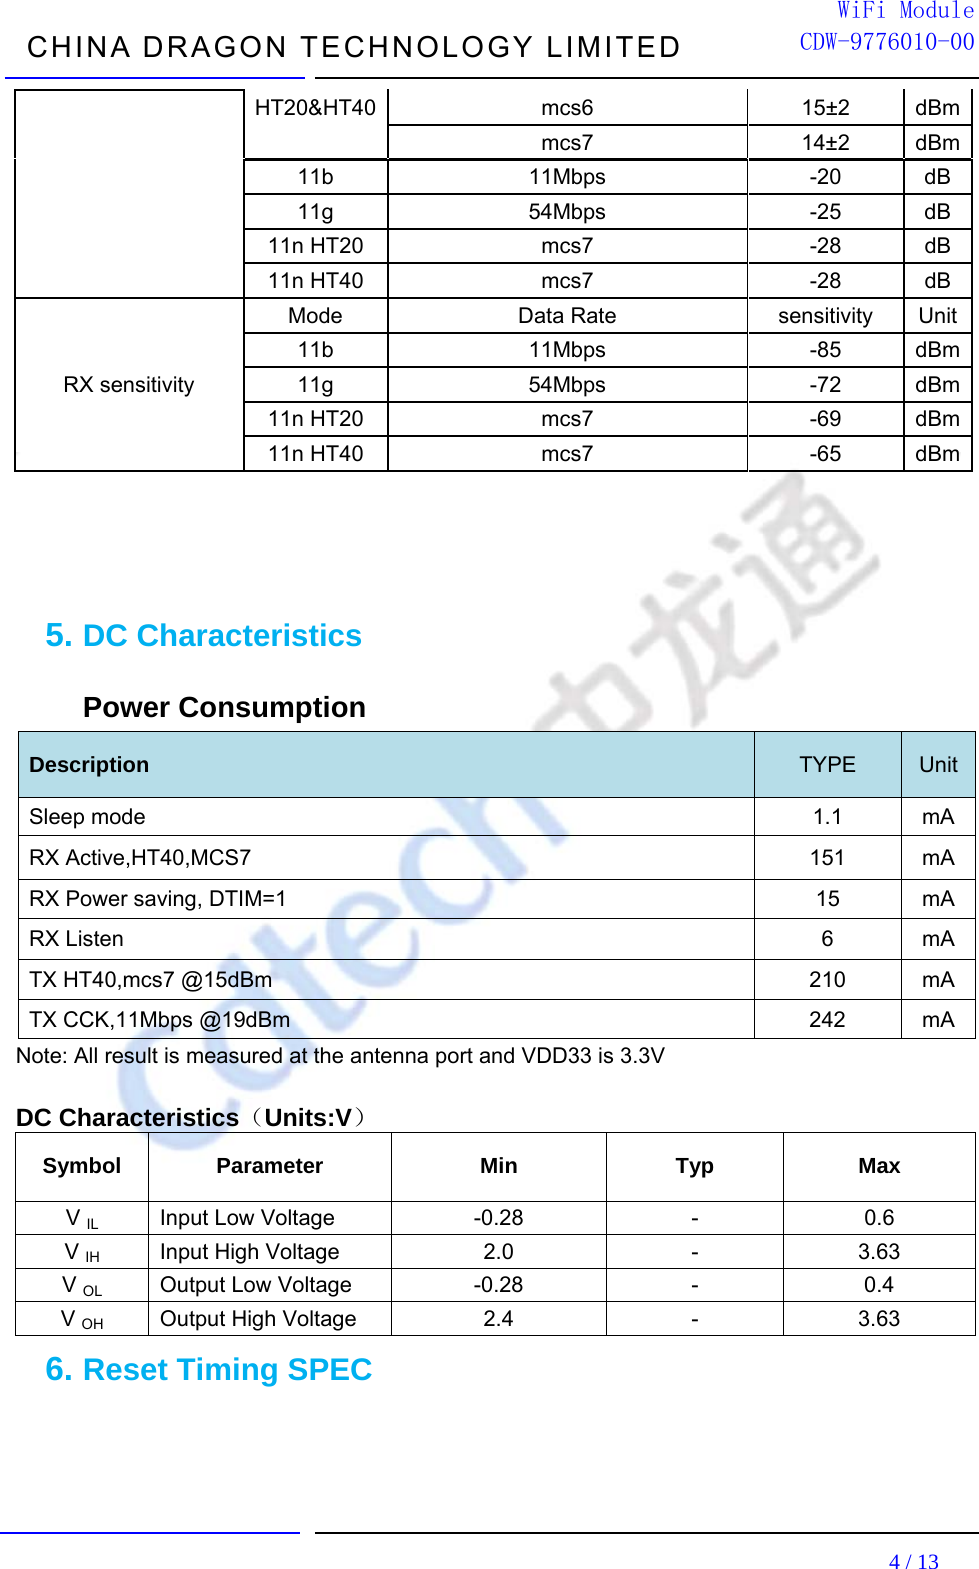  CHINA DRAGON TECHNOLOGY LIMITED                                                                         4 / 13  WiFi ModuleCDW-9776010-00HT20&amp;HT40 mcs6  15±2 dBmmcs7 14±2 dBm11b 11Mbps  -20 dB 11g 54Mbps  -25 dB 11n HT20  mcs7  -28  dB 11n HT40  mcs7  -28  dB RX sensitivity Mode Data Rate sensitivity Unit11b 11Mbps  -85 dBm11g 54Mbps  -72 dBm11n HT20  mcs7  -69  dBm11n HT40  mcs7  -65  dBm  5. DC Characteristics Power Consumption   Description  TYPE  UnitSleep mode  1.1  mA RX Active,HT40,MCS7  151  mA RX Power saving, DTIM=1  15  mA RX Listen  6  mA TX HT40,mcs7 @15dBm  210  mA TX CCK,11Mbps @19dBm  242  mA Note: All result is measured at the antenna port and VDD33 is 3.3V  DC Characteristics（Units:V） Symbol Parameter  Min  Typ  Max V IL  Input Low Voltage      -0.28  -  0.6 V IH  Input High Voltage      2.0  -  3.63 V OL Output Low Voltage  -0.28  -  0.4 V OH  Output High Voltage  2.4  -  3.63 6. Reset Timing SPEC 